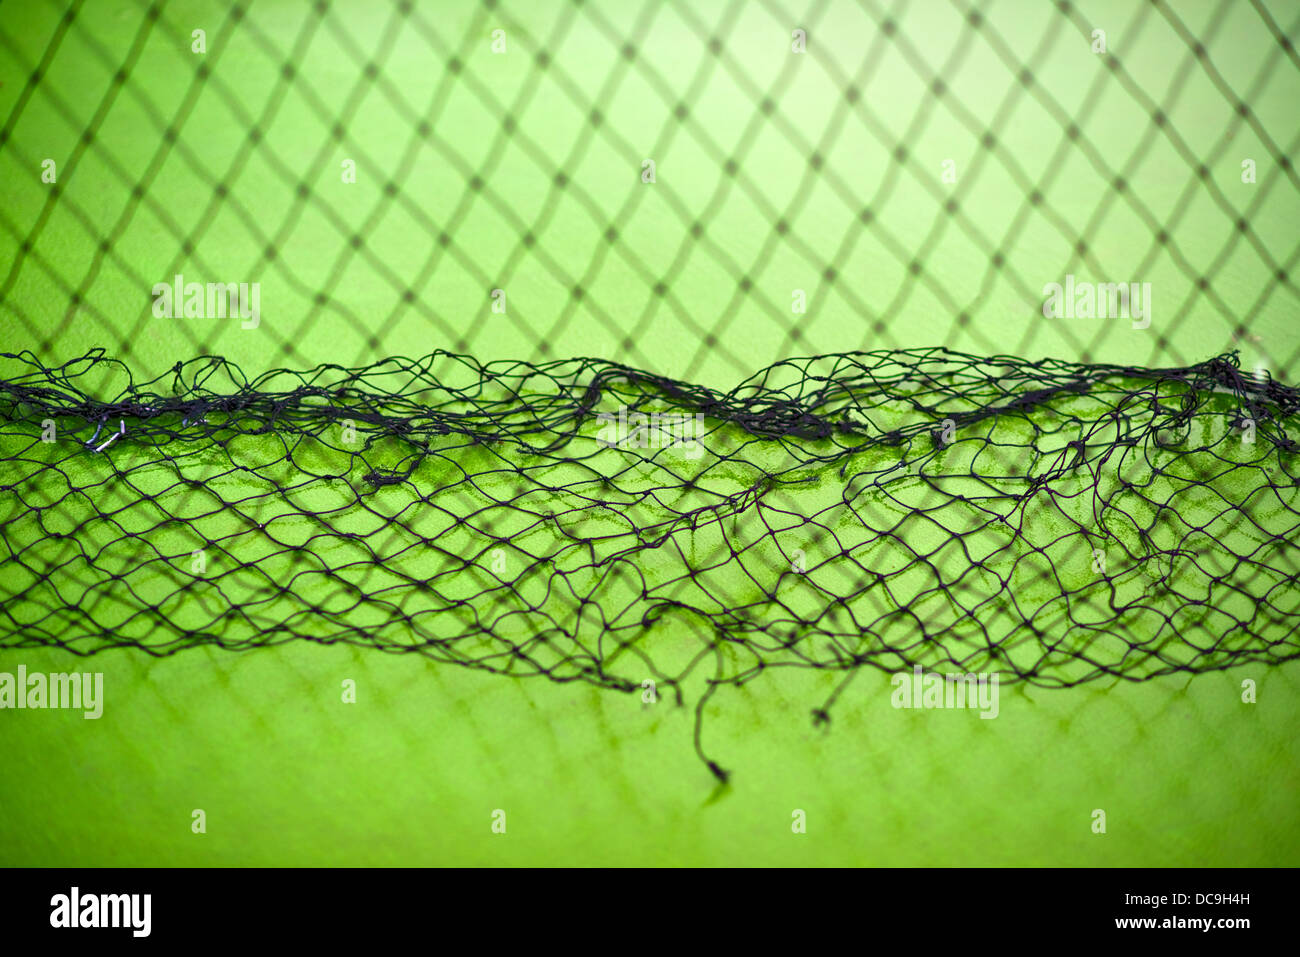 Net. Close up of netting as background. Stock Photo